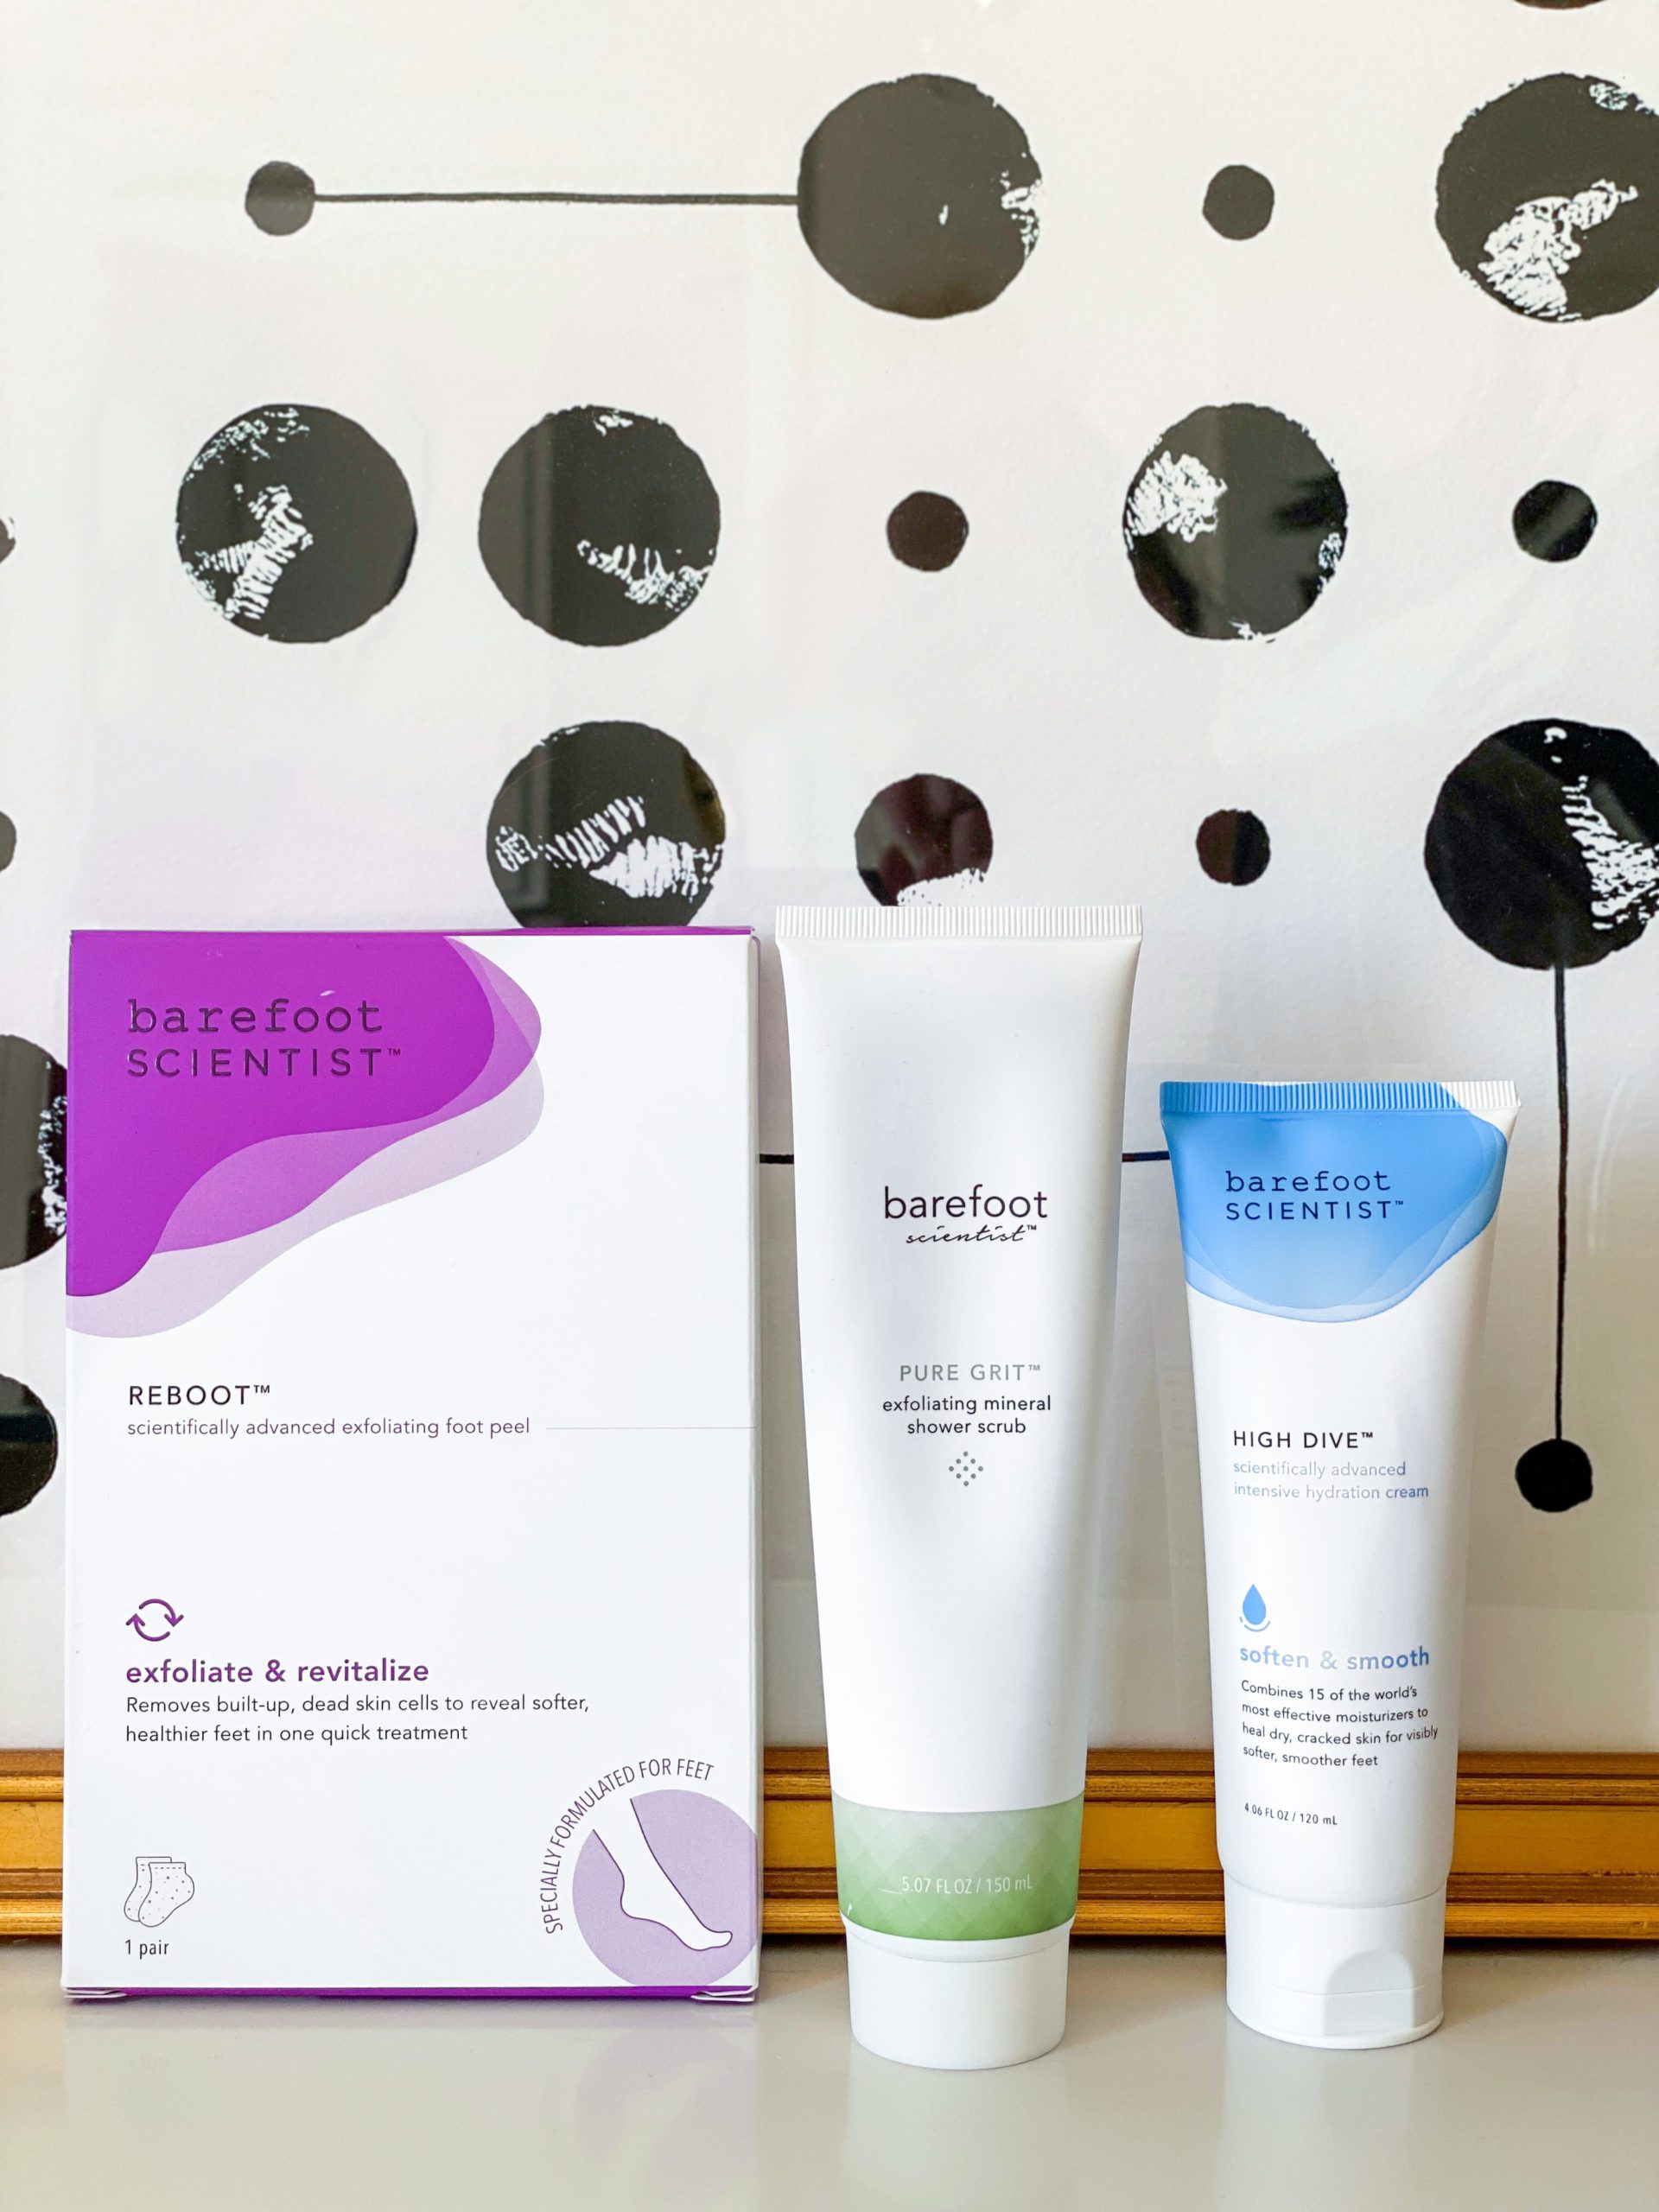 Foot Facial products from barefoot scientist